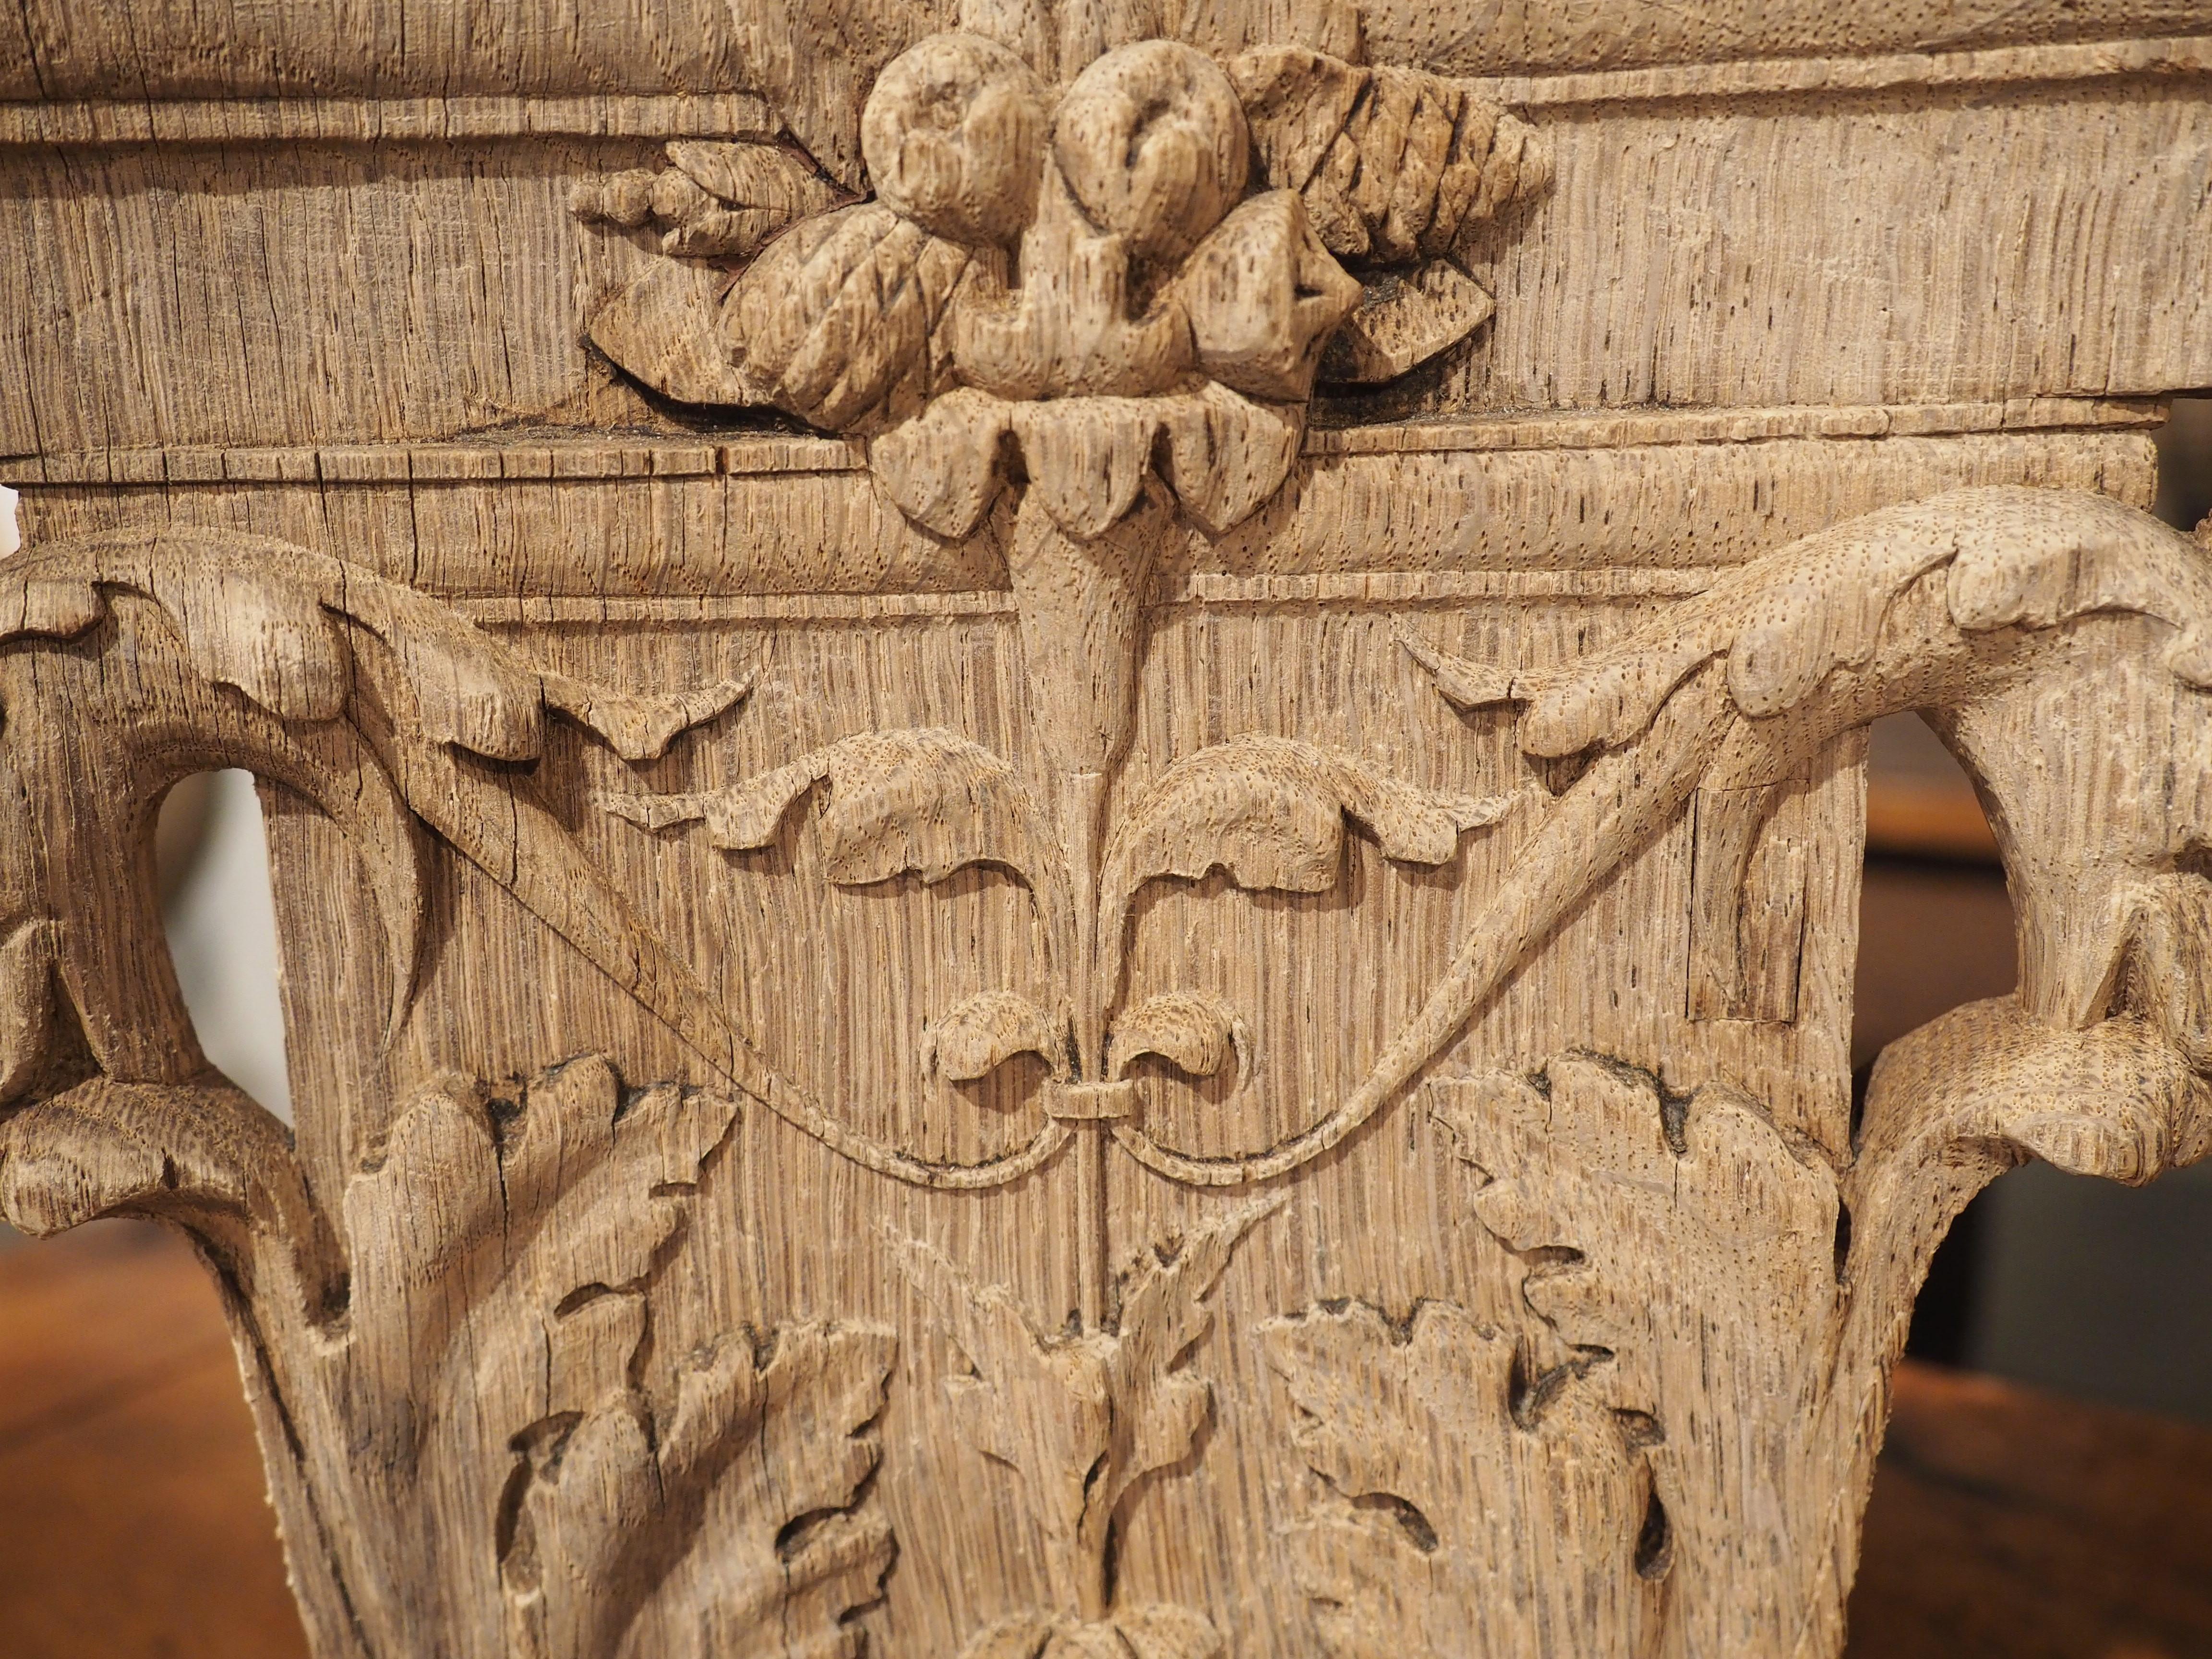 Hand-carved in France on “1er Octobre 1841” (see photo of the verso side), this oak capital features a large floral display beneath the molded entablature. There is a fruit and pinecone grouping that sits on top of the petals and extends onto the